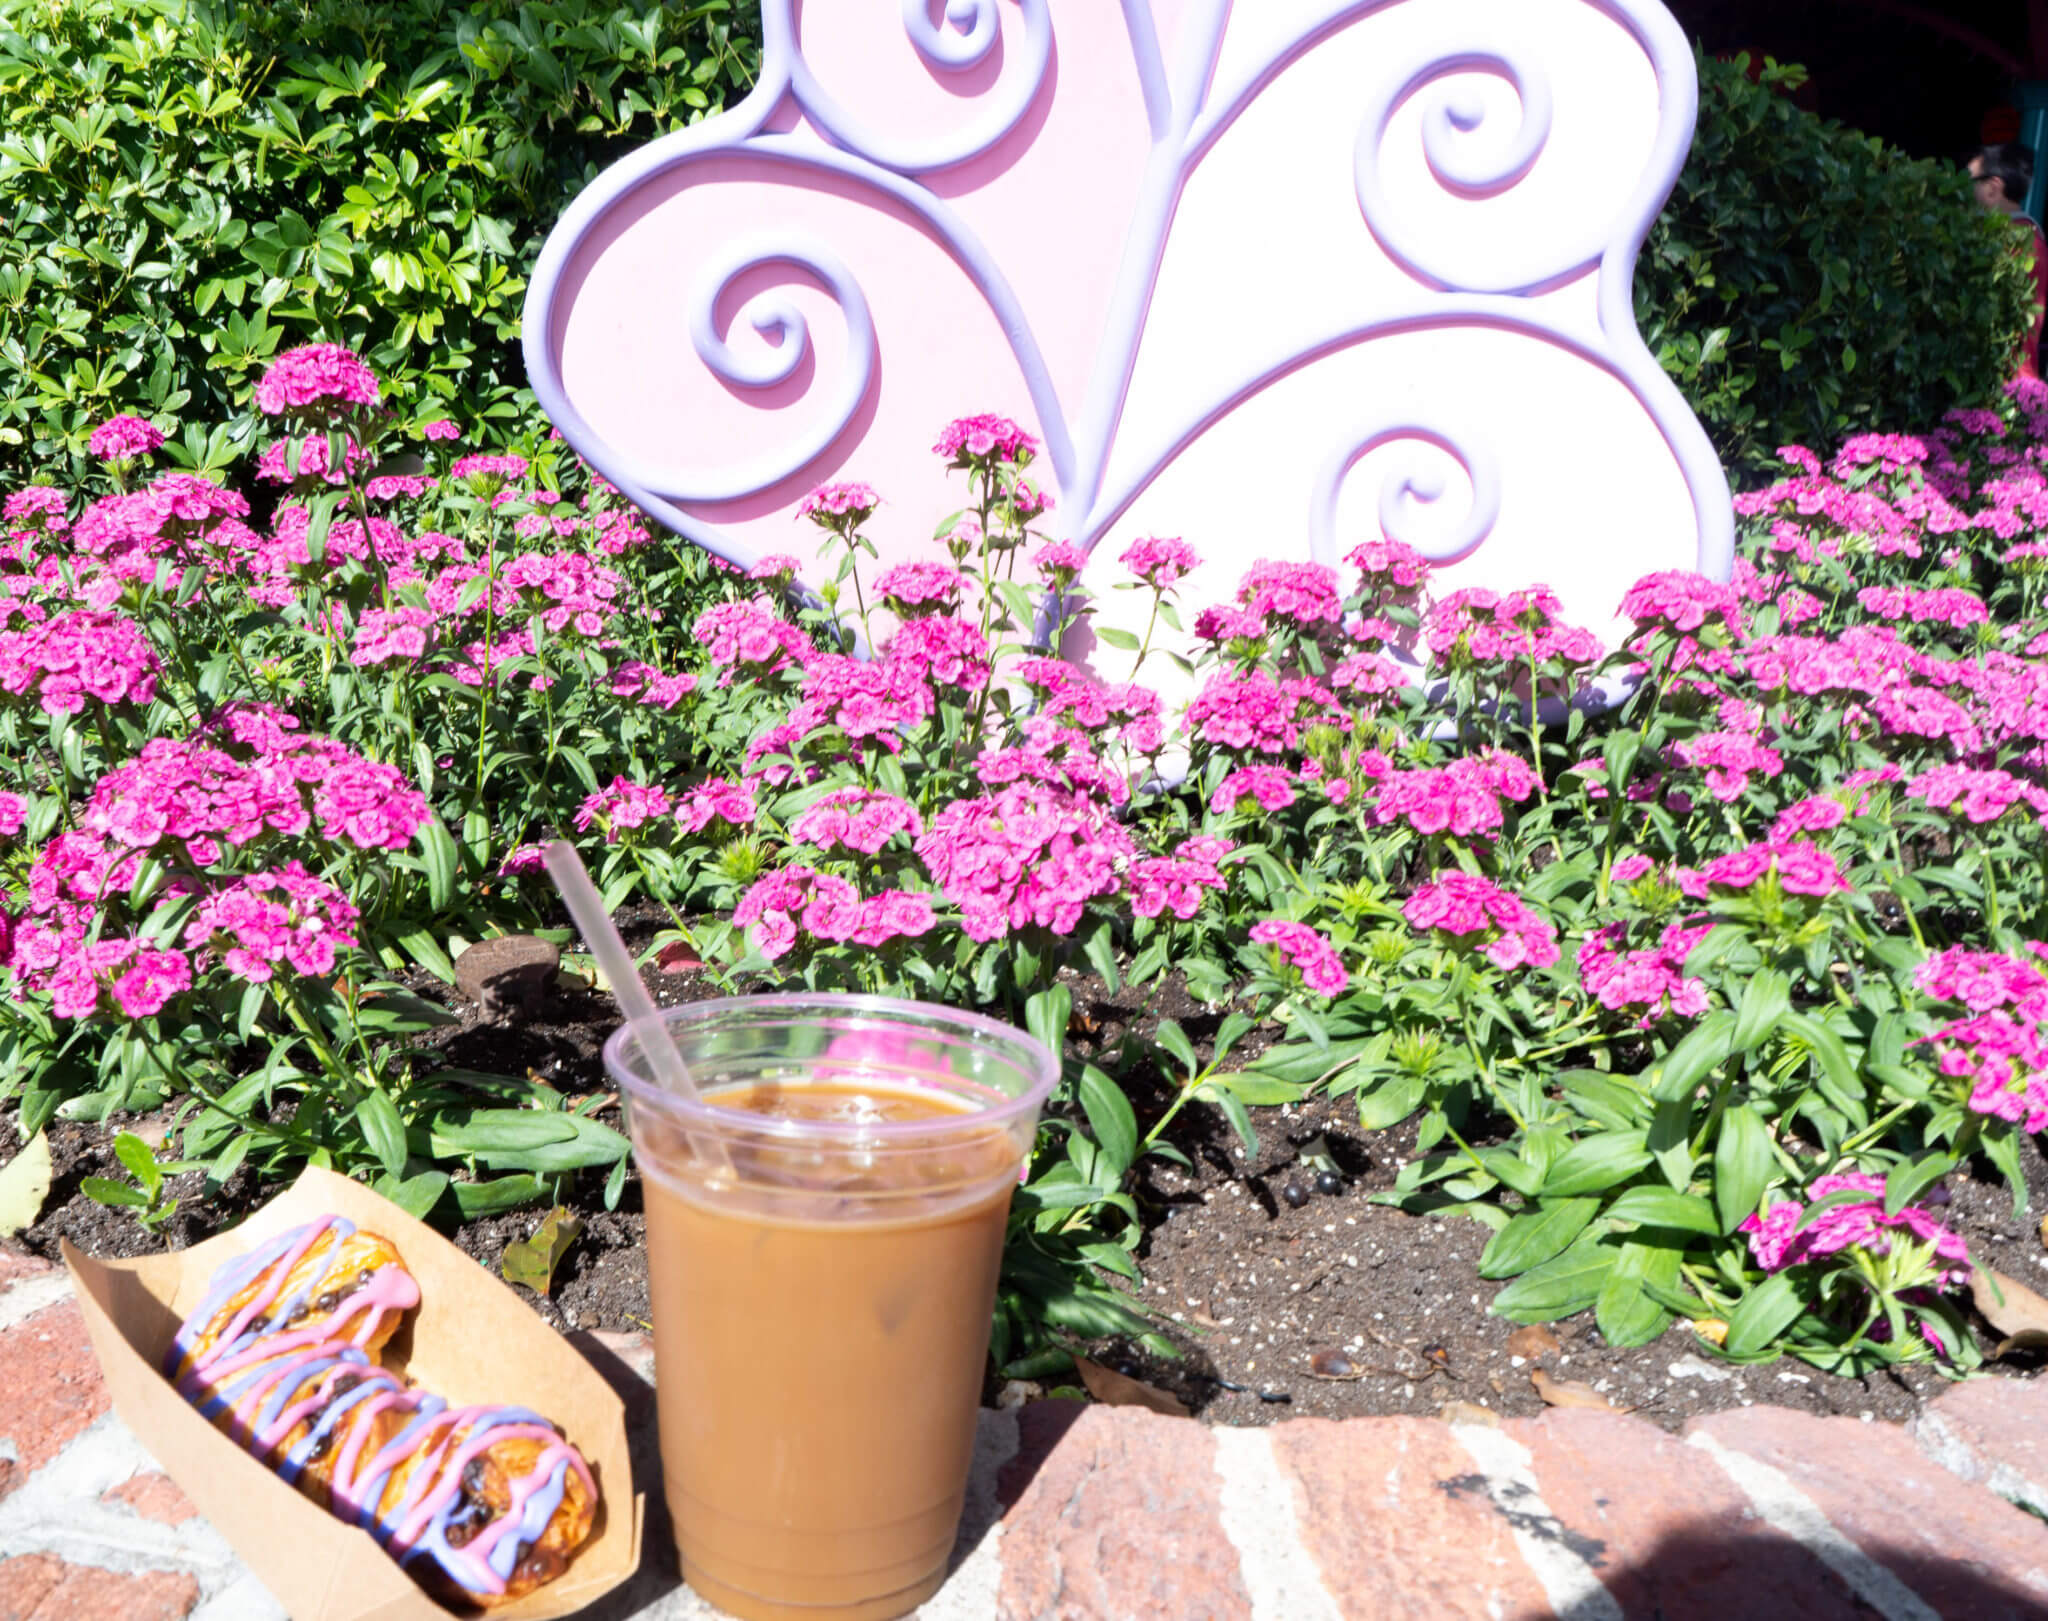 Cheshire Cat Tail Pastry and Cold Brew Coffee from Cheshire Cafe in Disney World's Magic Kingdom